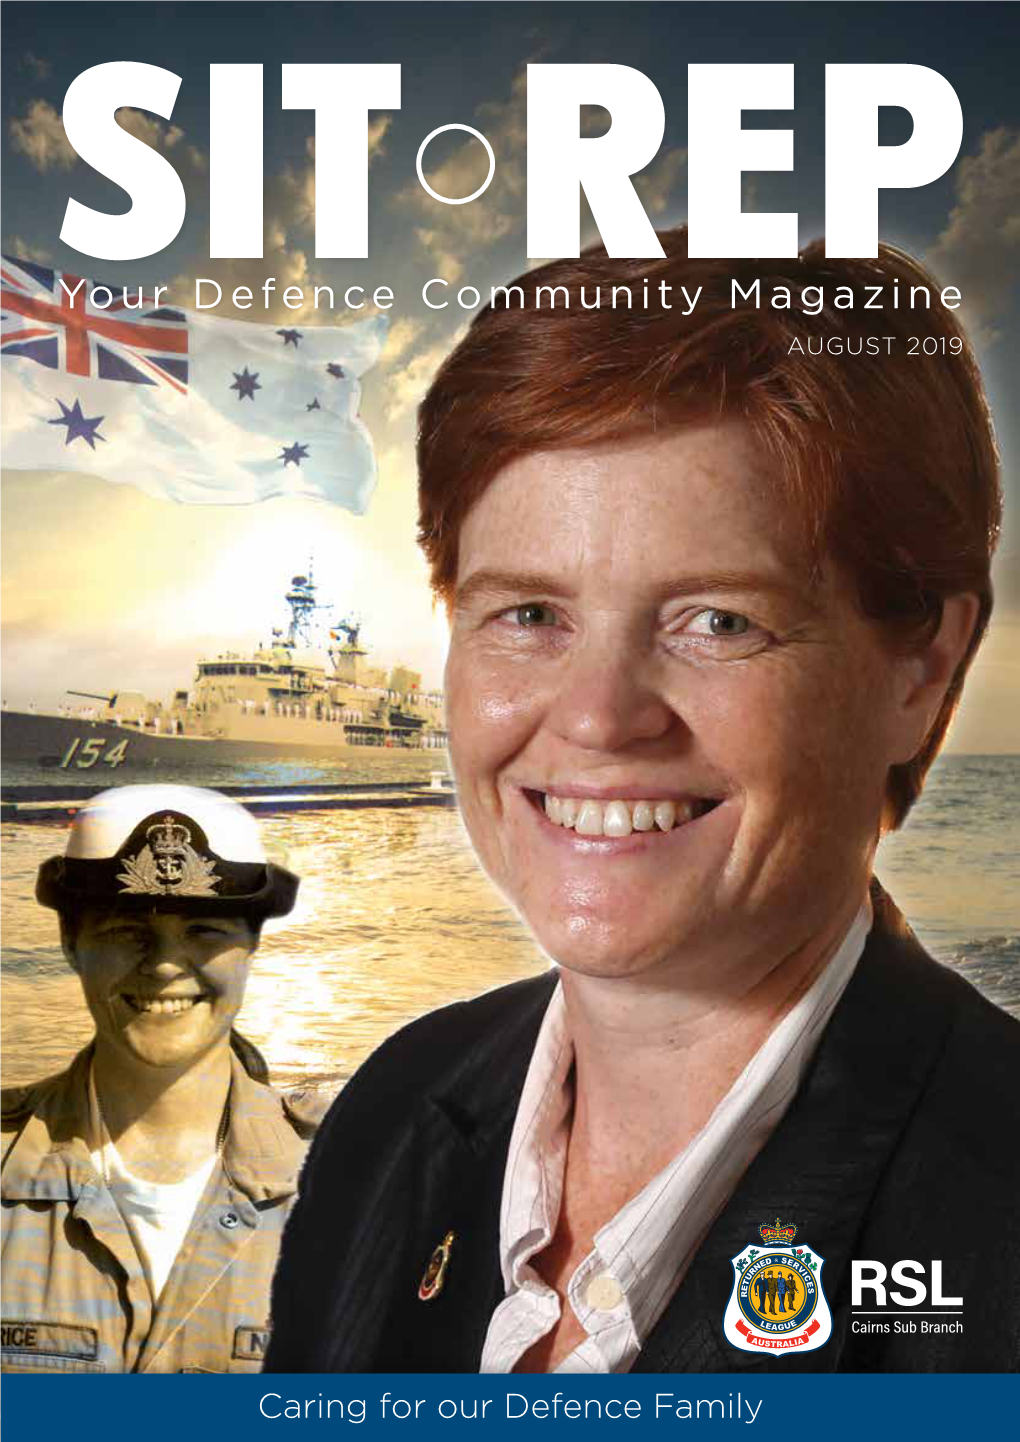 Your Defence Community Magazine AUGUST 2019